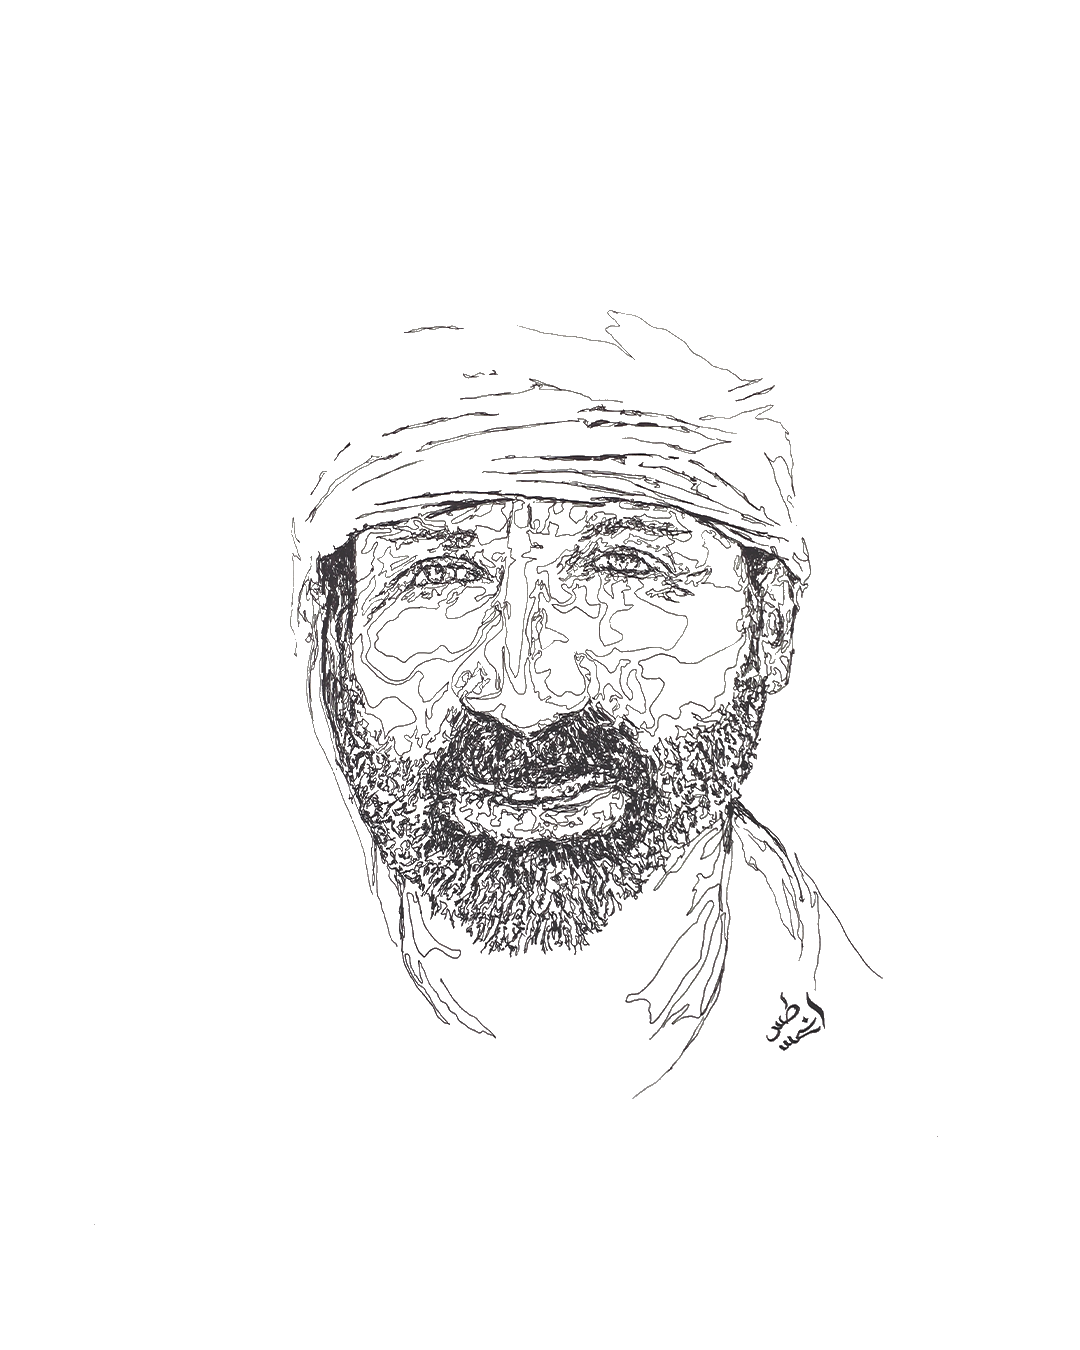 drawing of an Arab man in pen and ink